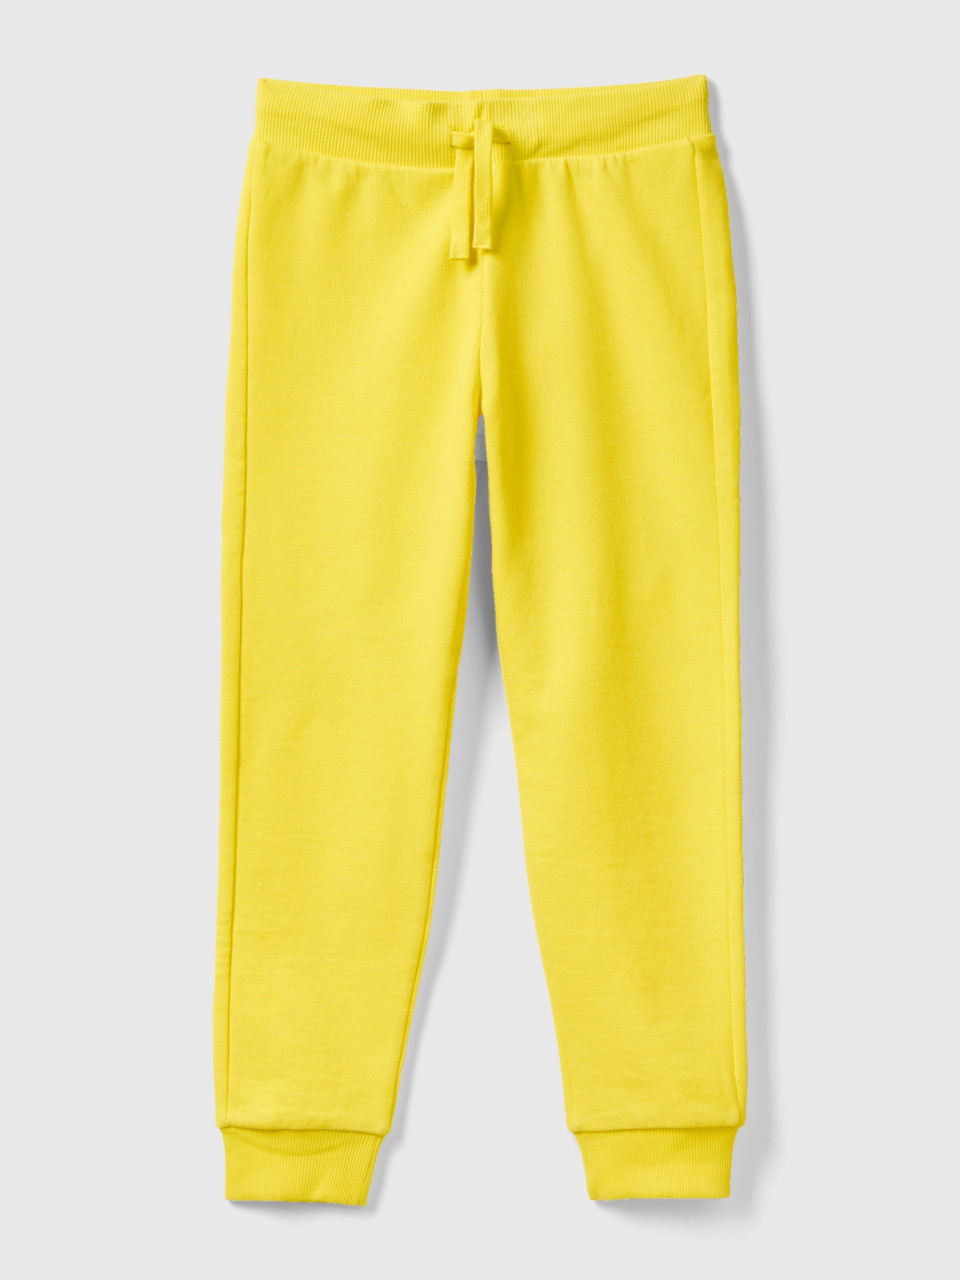 Benetton, Sporty Trousers With Drawstring, Yellow, Kids